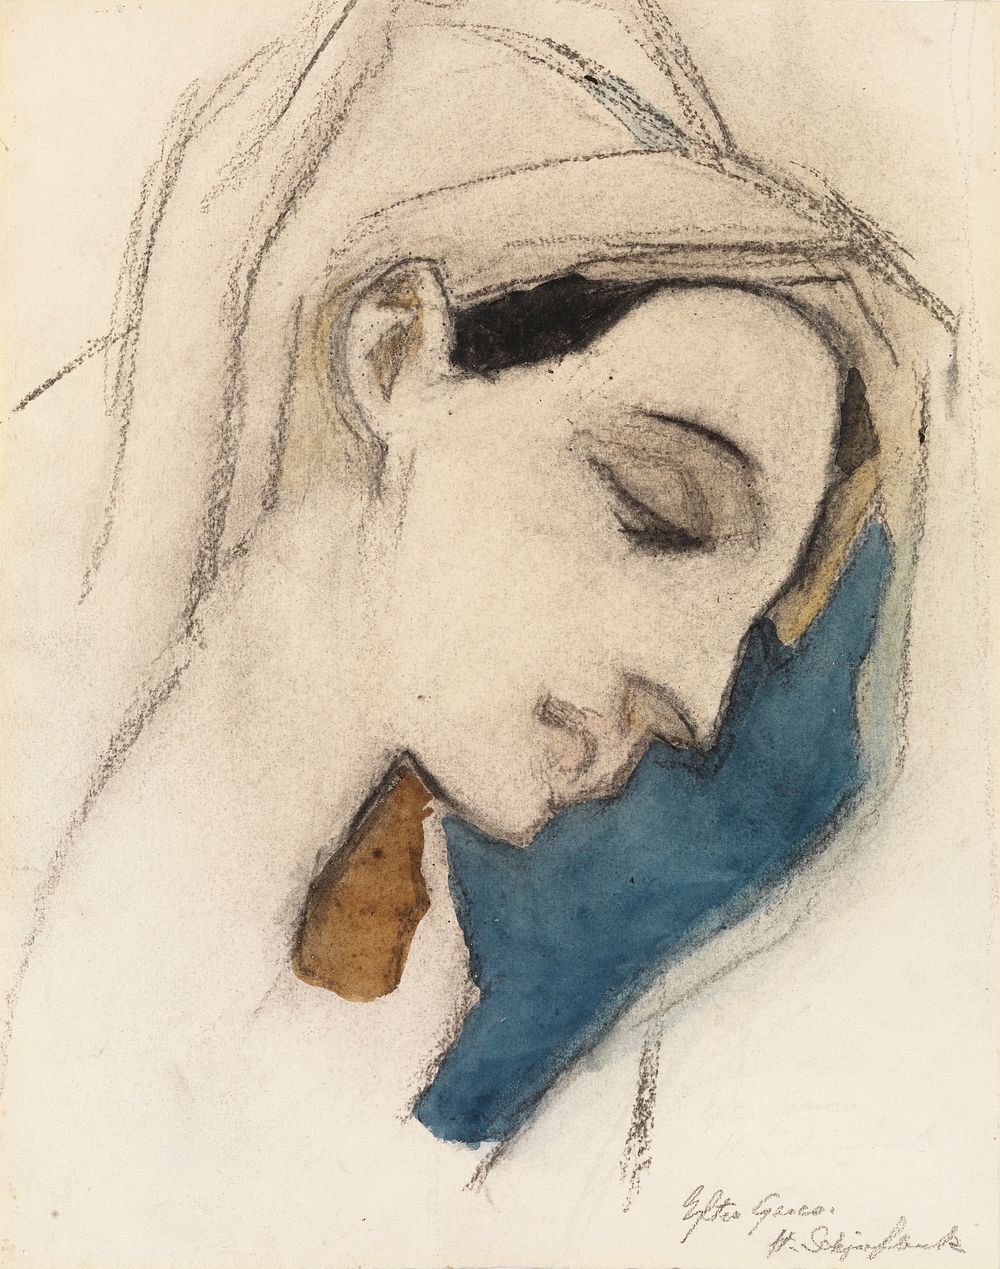 Virgin mary, after el greco, 1942 by Helene Schjerfbeck